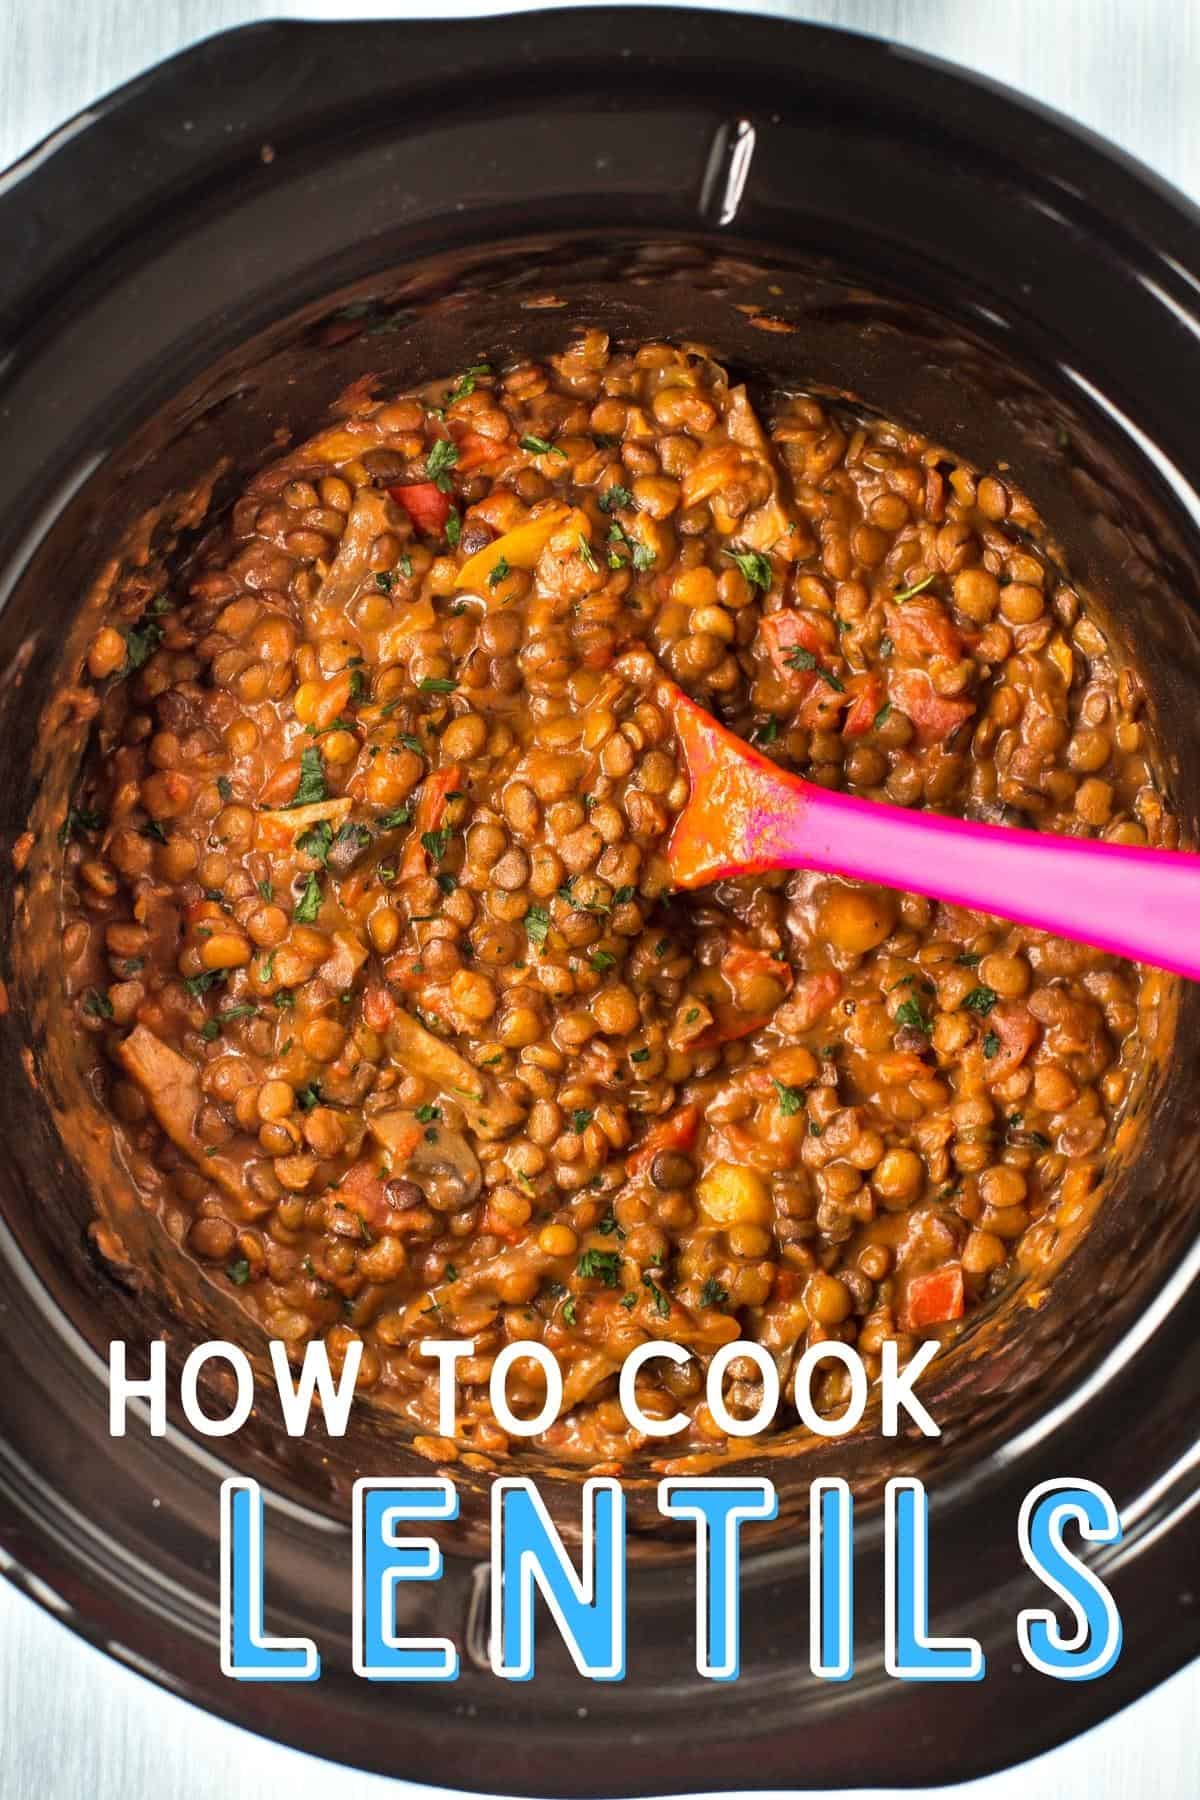 How to cook lentils.